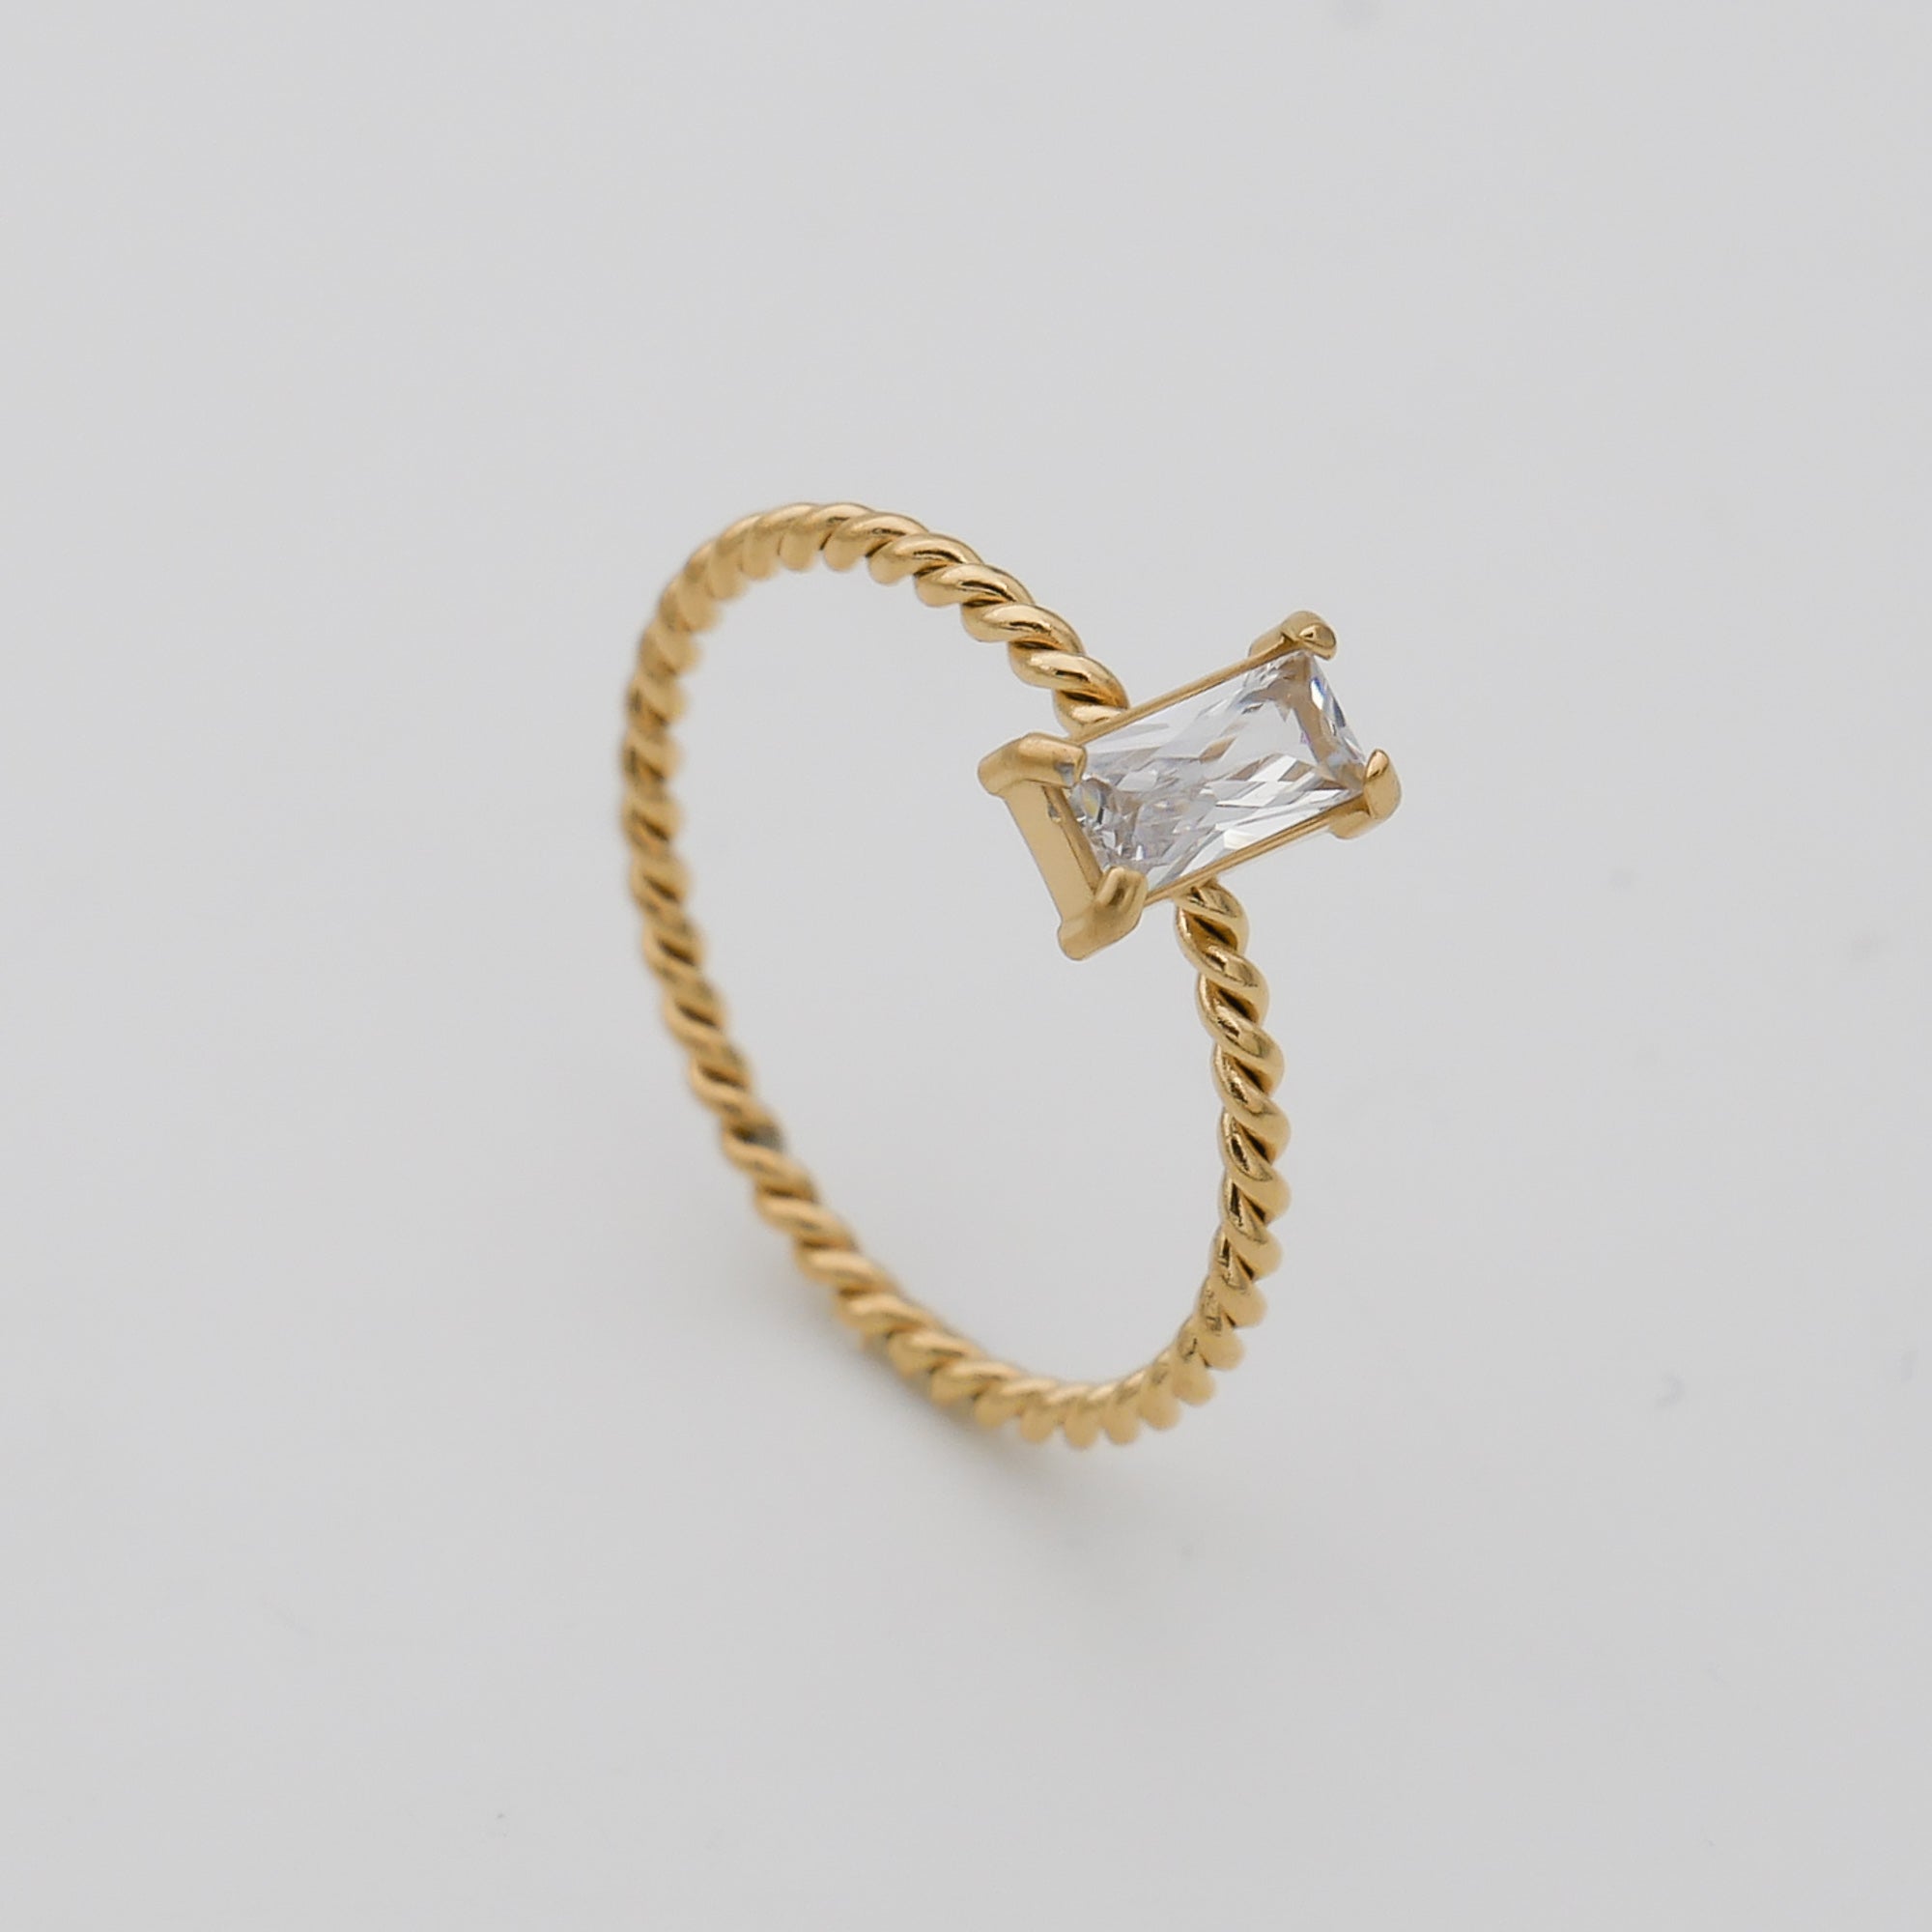 Selin twisted ring in clear